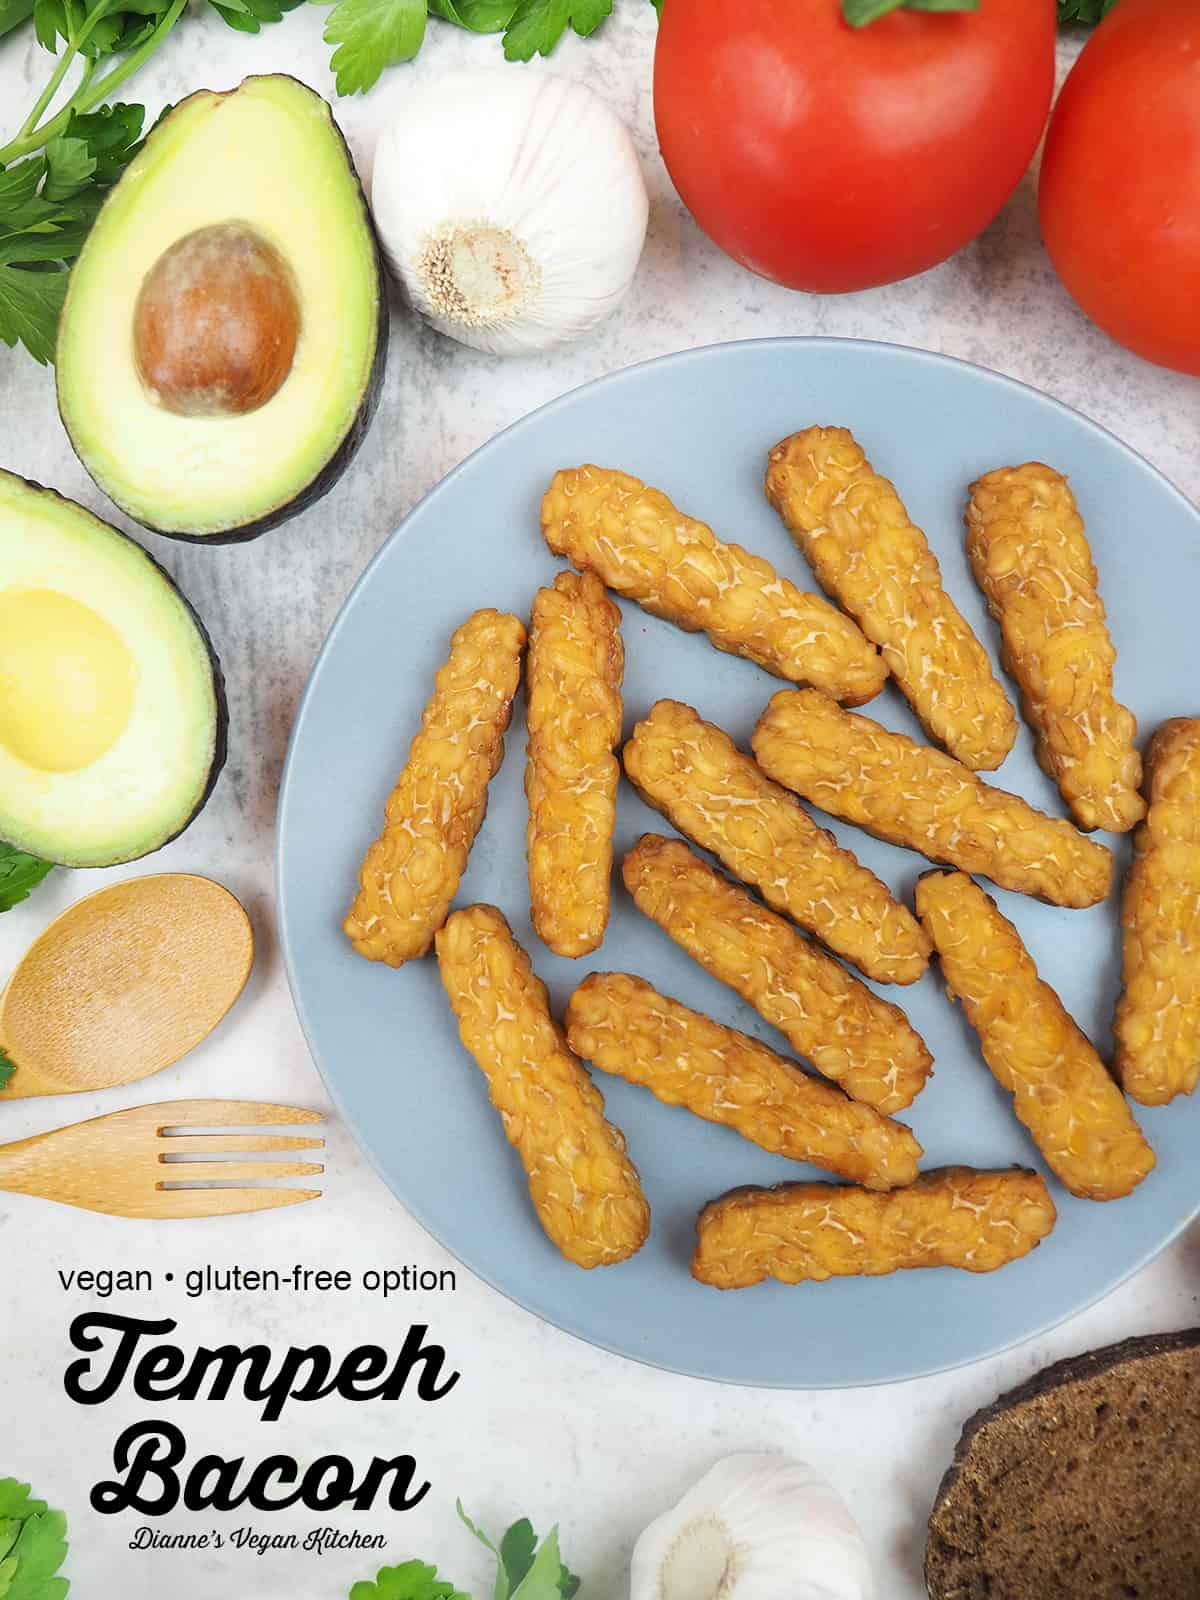 Tempeh Bacon with text overlay